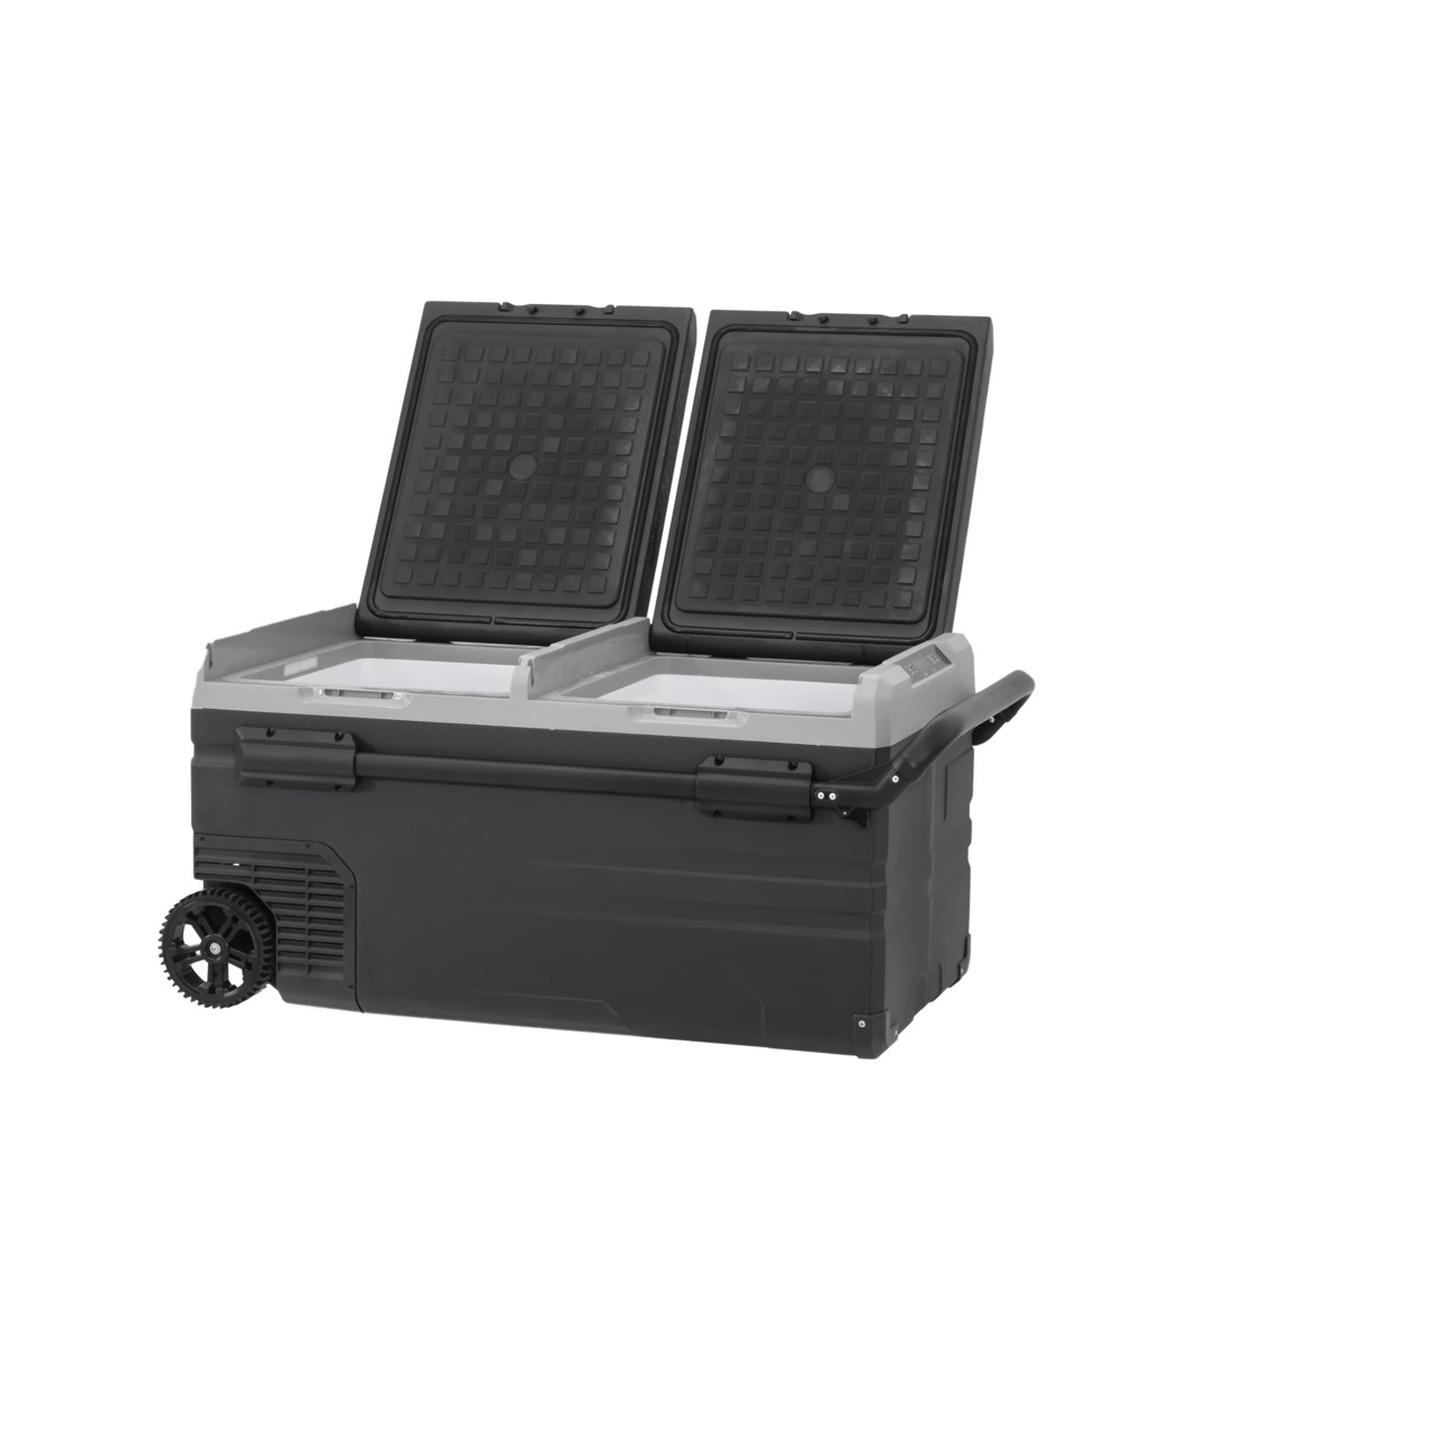 75L Brass Monkey Portable Low Profile Dual Zone Fridge/Freezer with Wheels and Battery Compartment